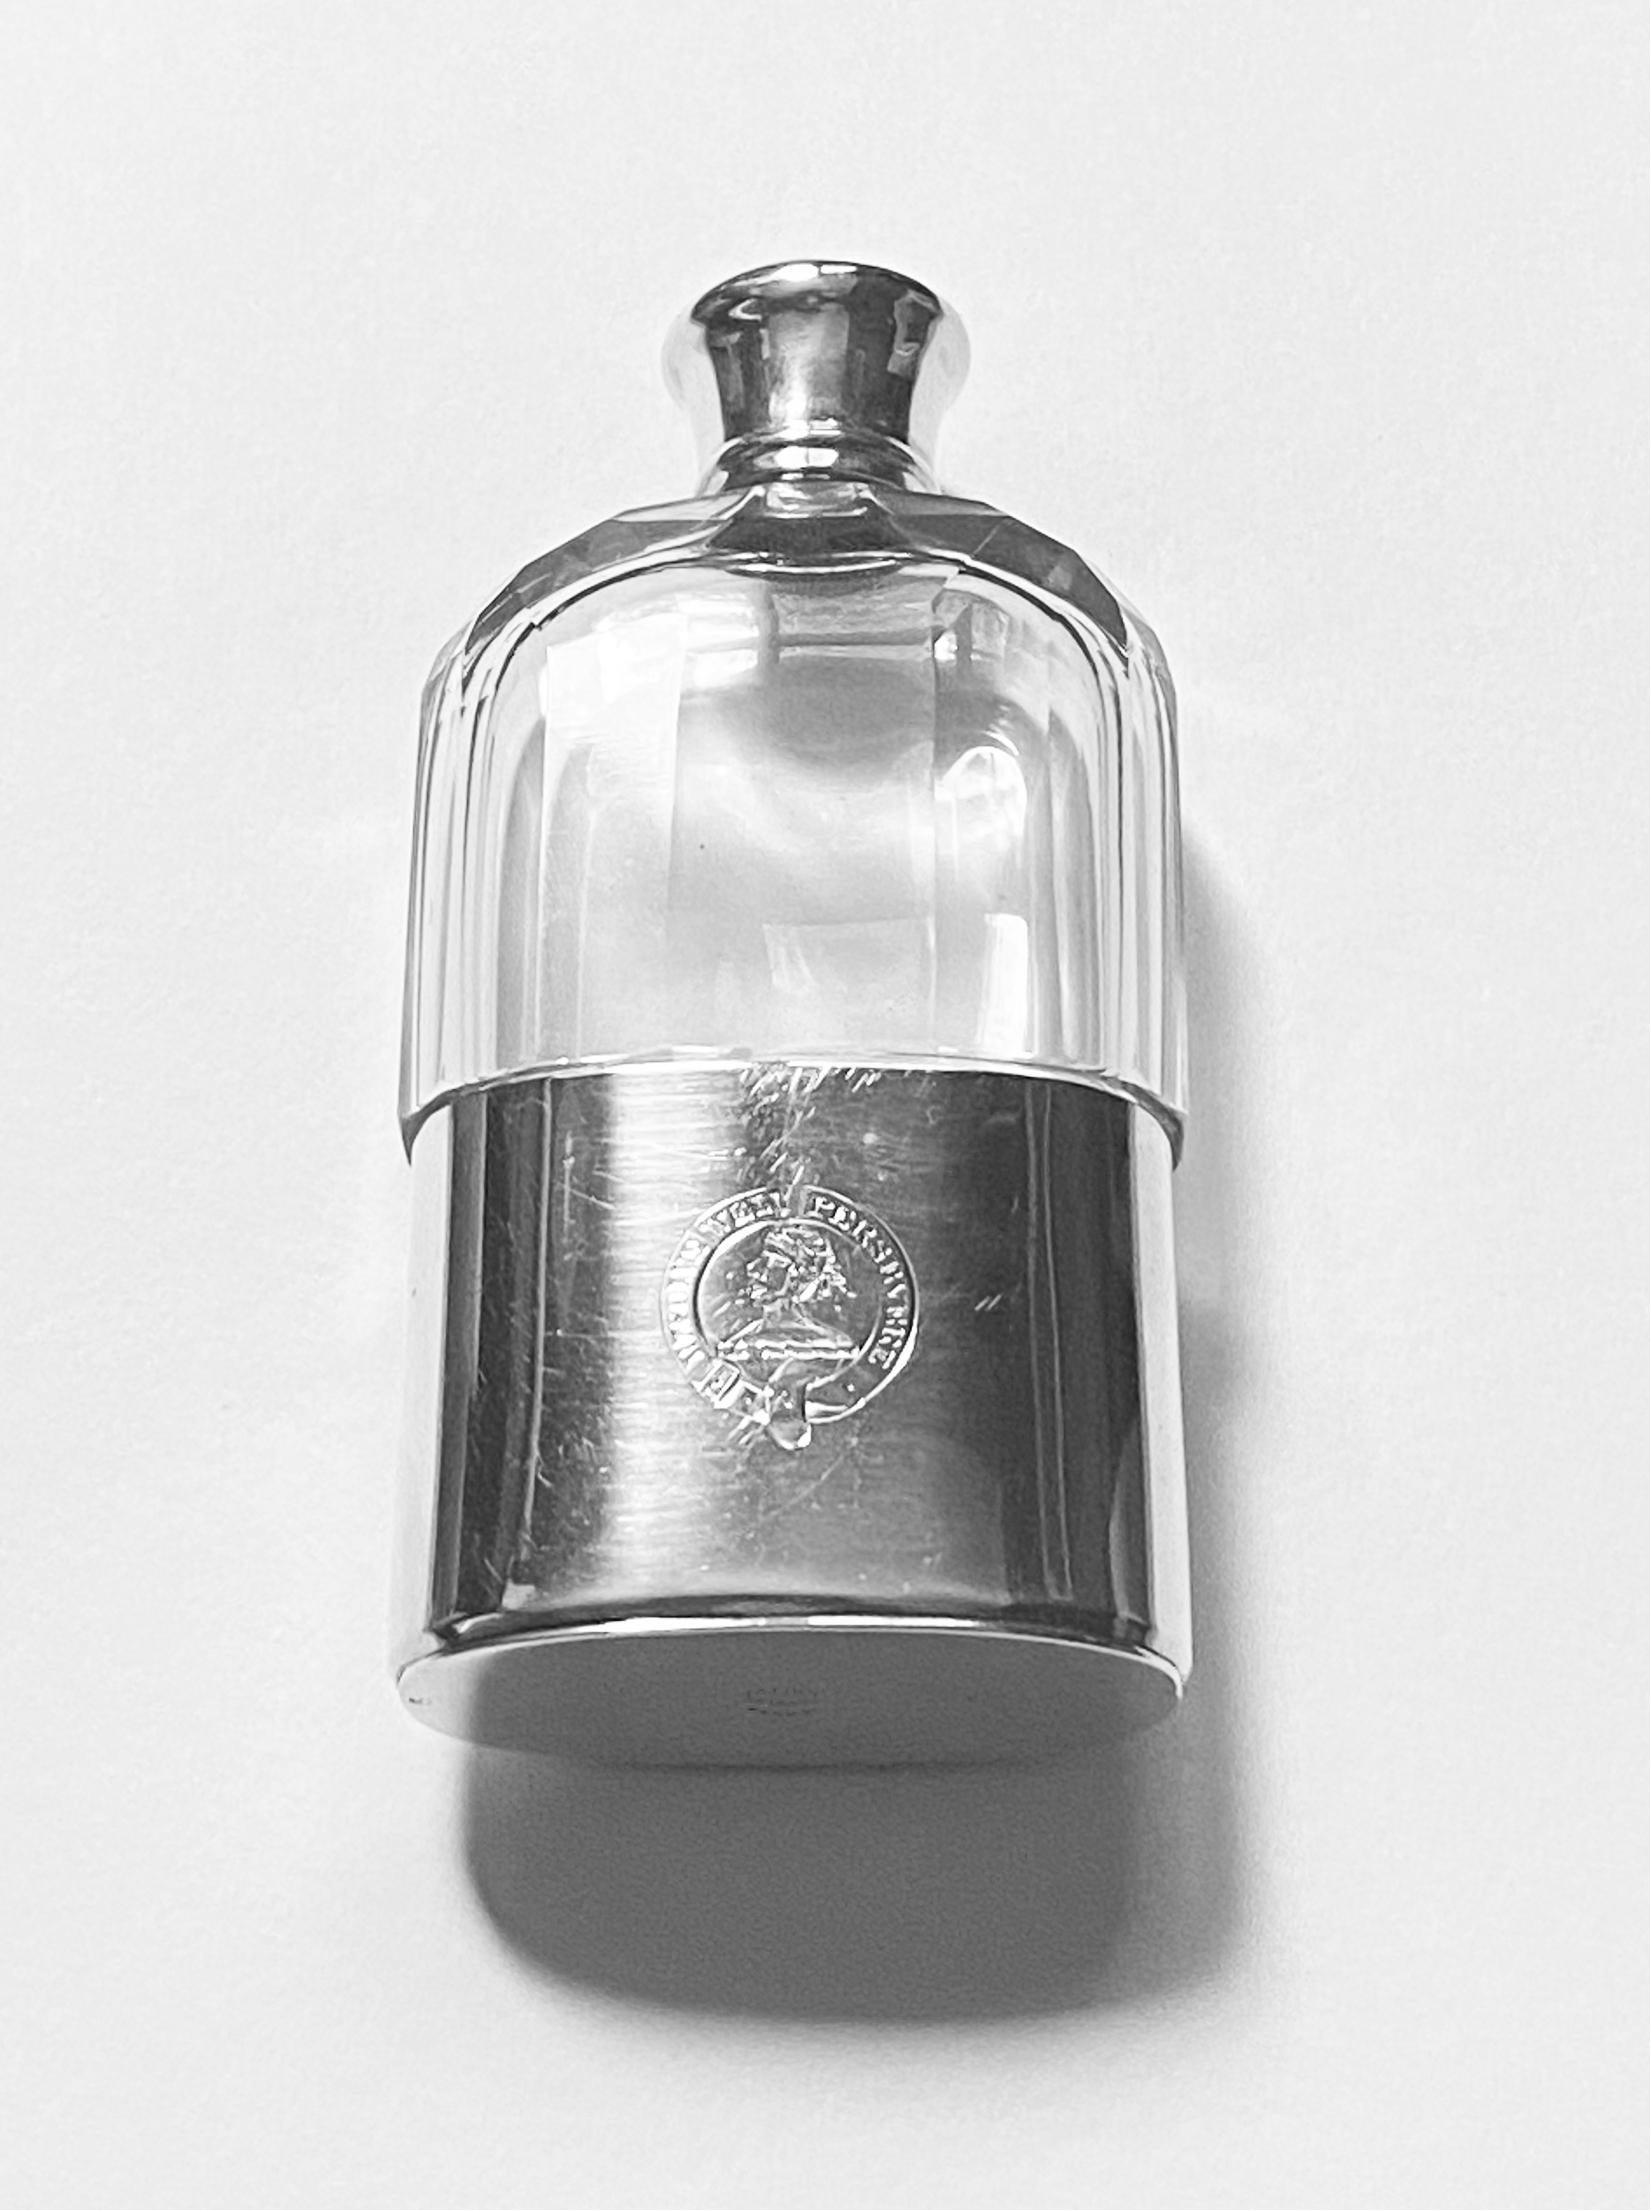 Asprey English hallmarked Silver hip flask, London 1867, Wright and Davies, retailed by Asprey. The flask with lower silver detachable cup, gilded interior, upper faceted panel glass, silver screw top. The cup and cover engraved with crest and motto